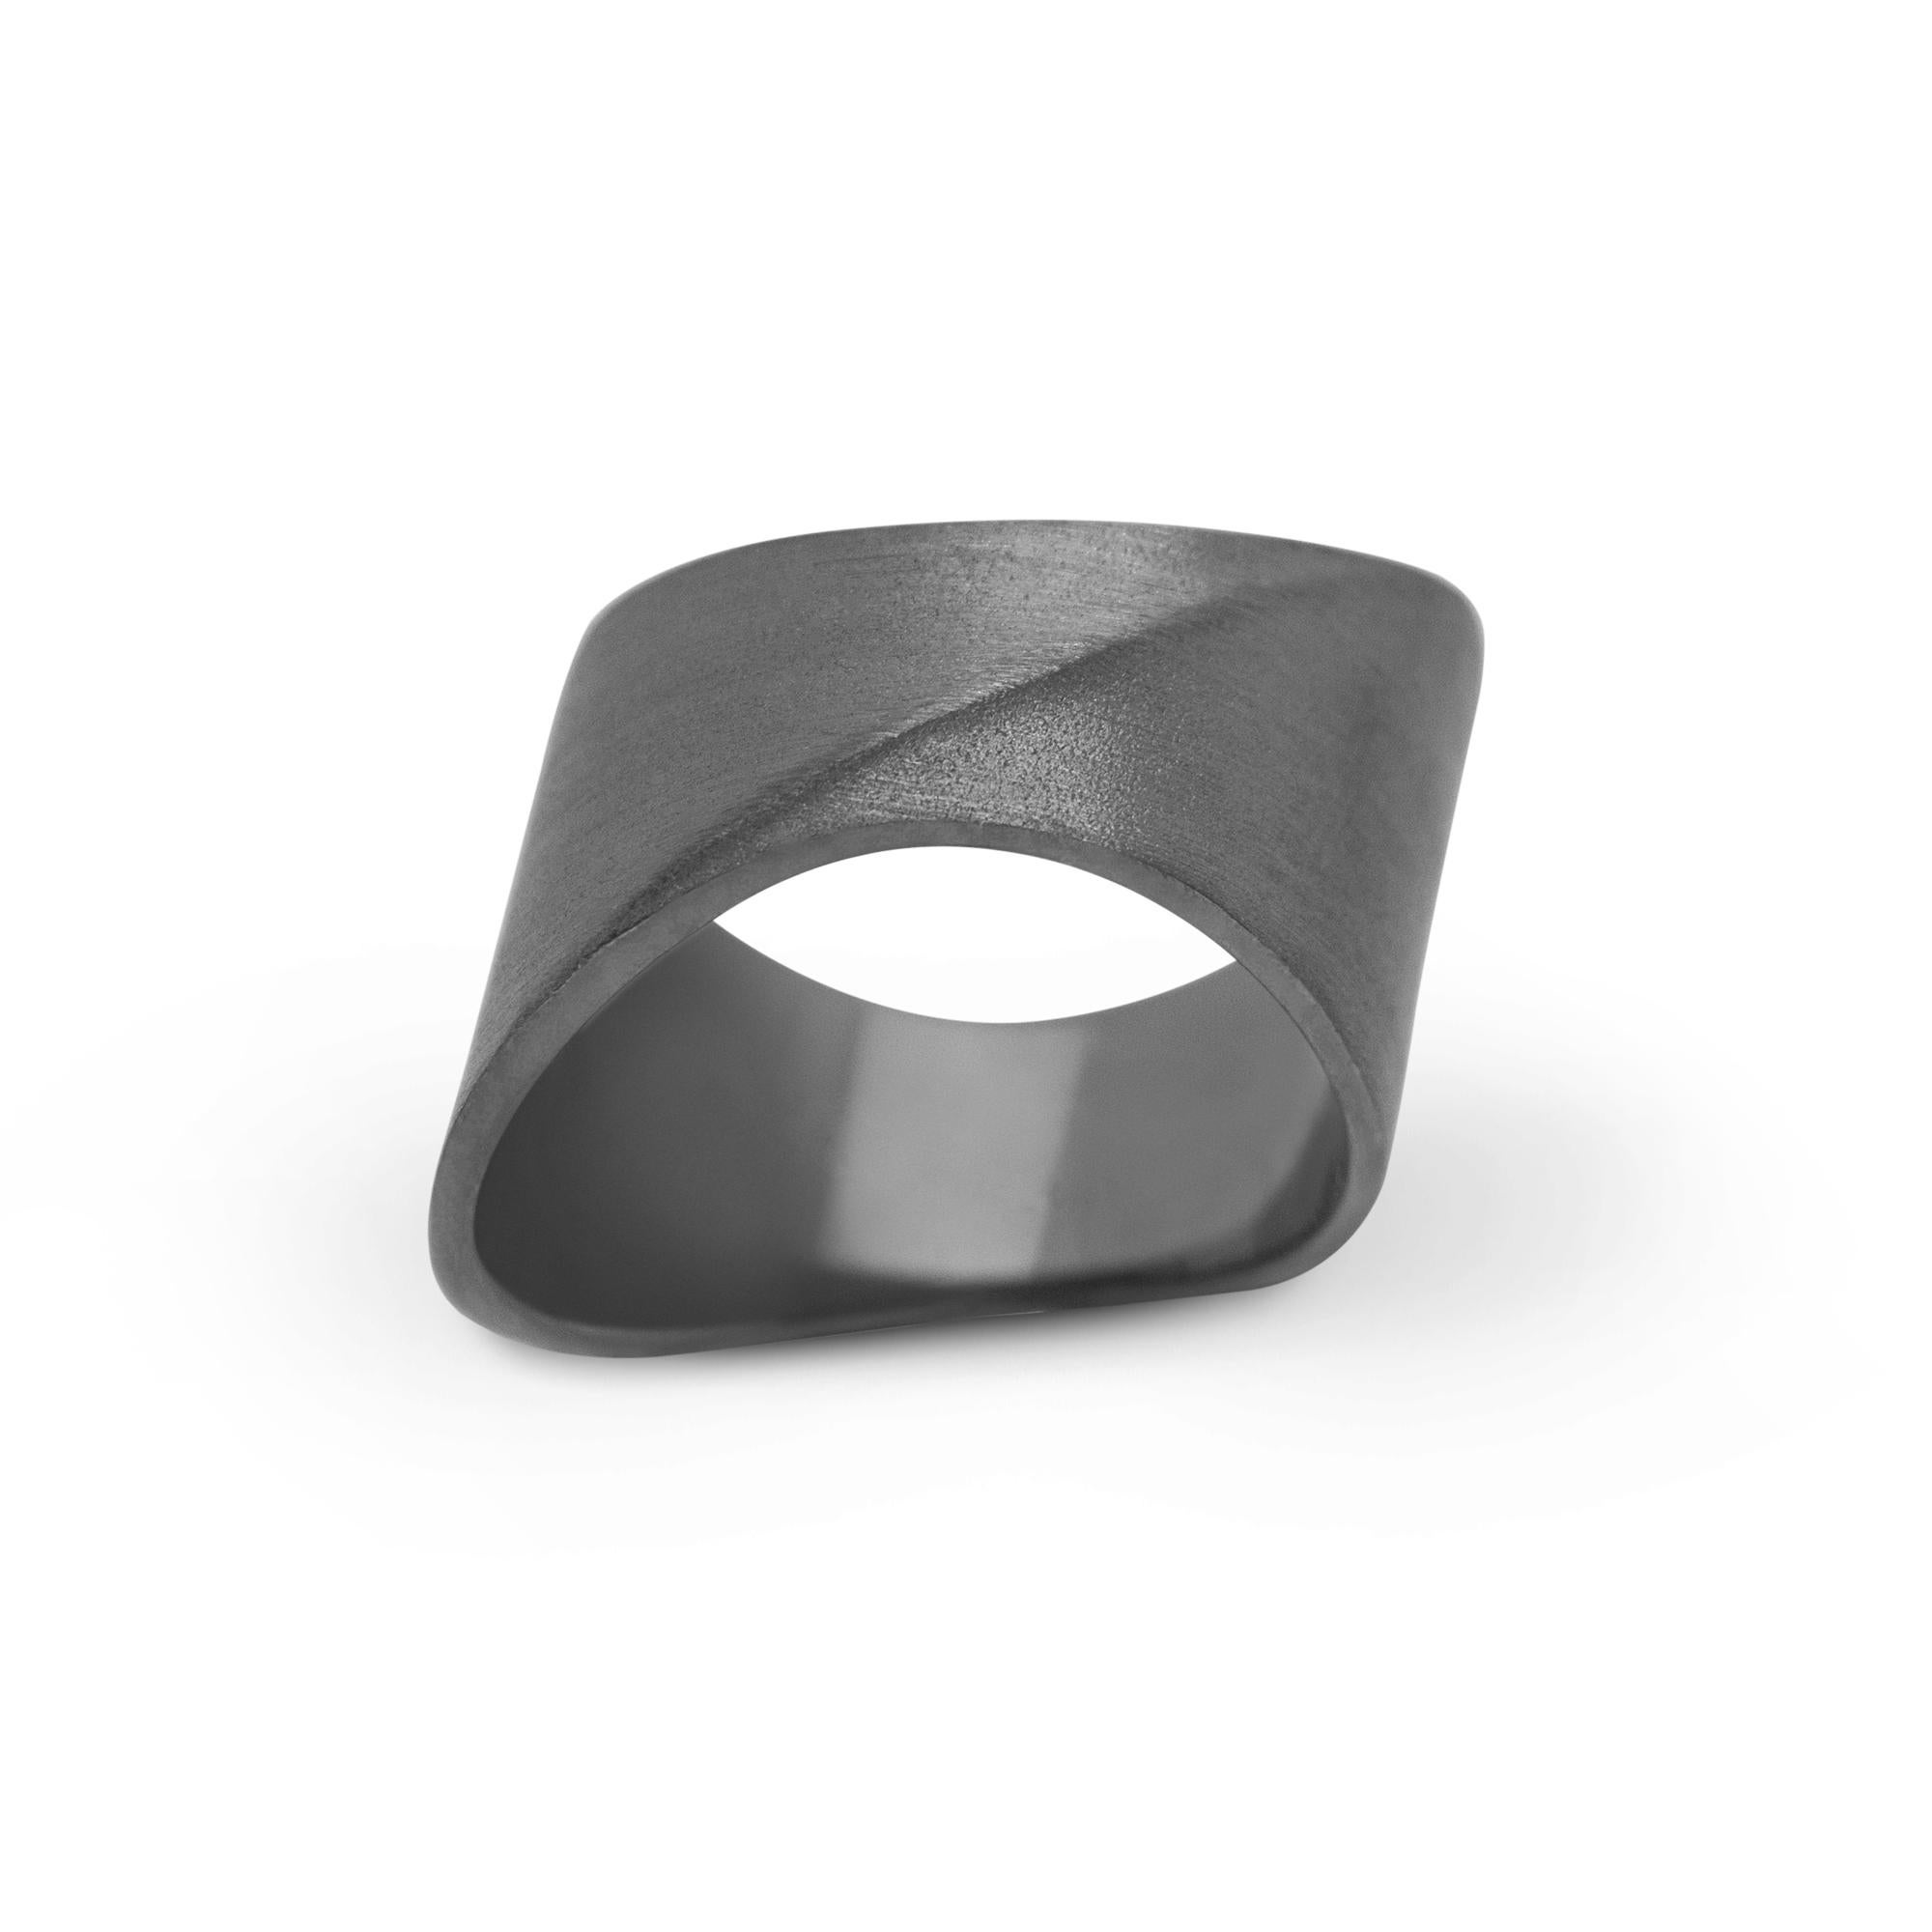 Unisex band ring with a minimalistic bold design.
Size UK M - 52.5 (mm) in stock, more sizes available upon request, made to order items are not returnable.
Perfect worn solo or horizontally stacked with multiple rings from the same collection.